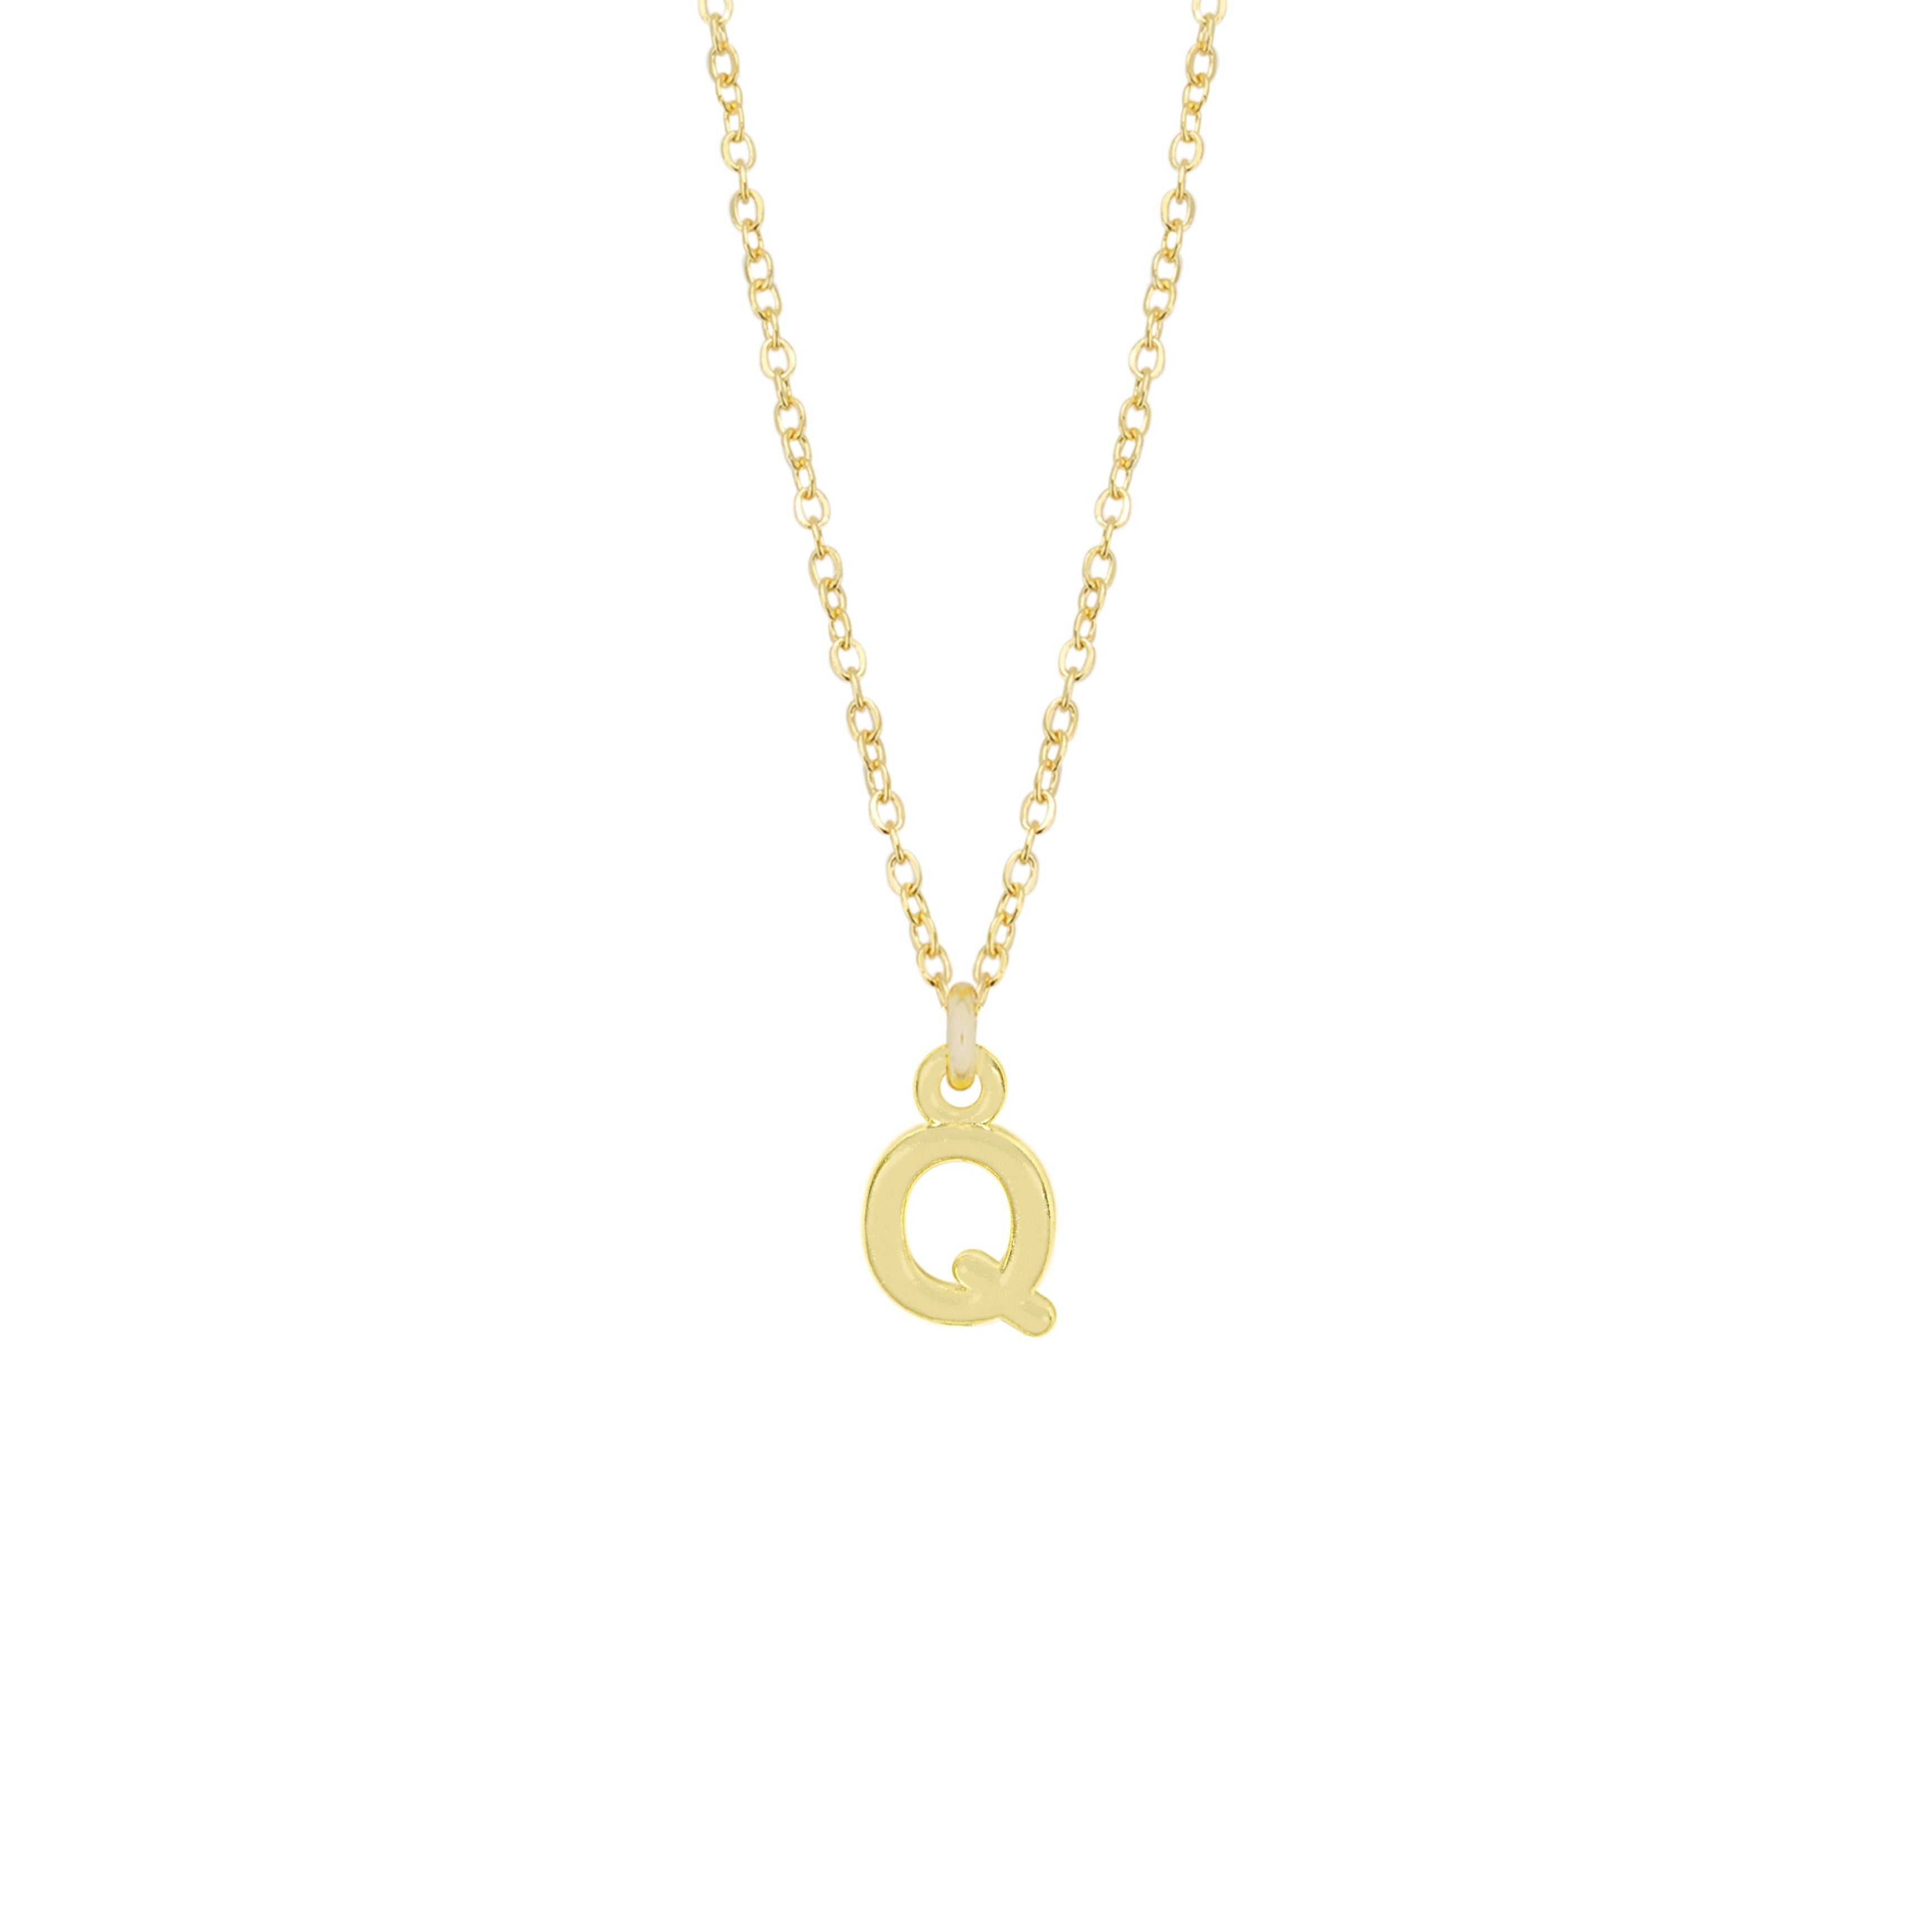 Q Gold Initial Necklace by Katie Dean Jewelry, made in America, perfect for the dainty minimal jewelry lovers